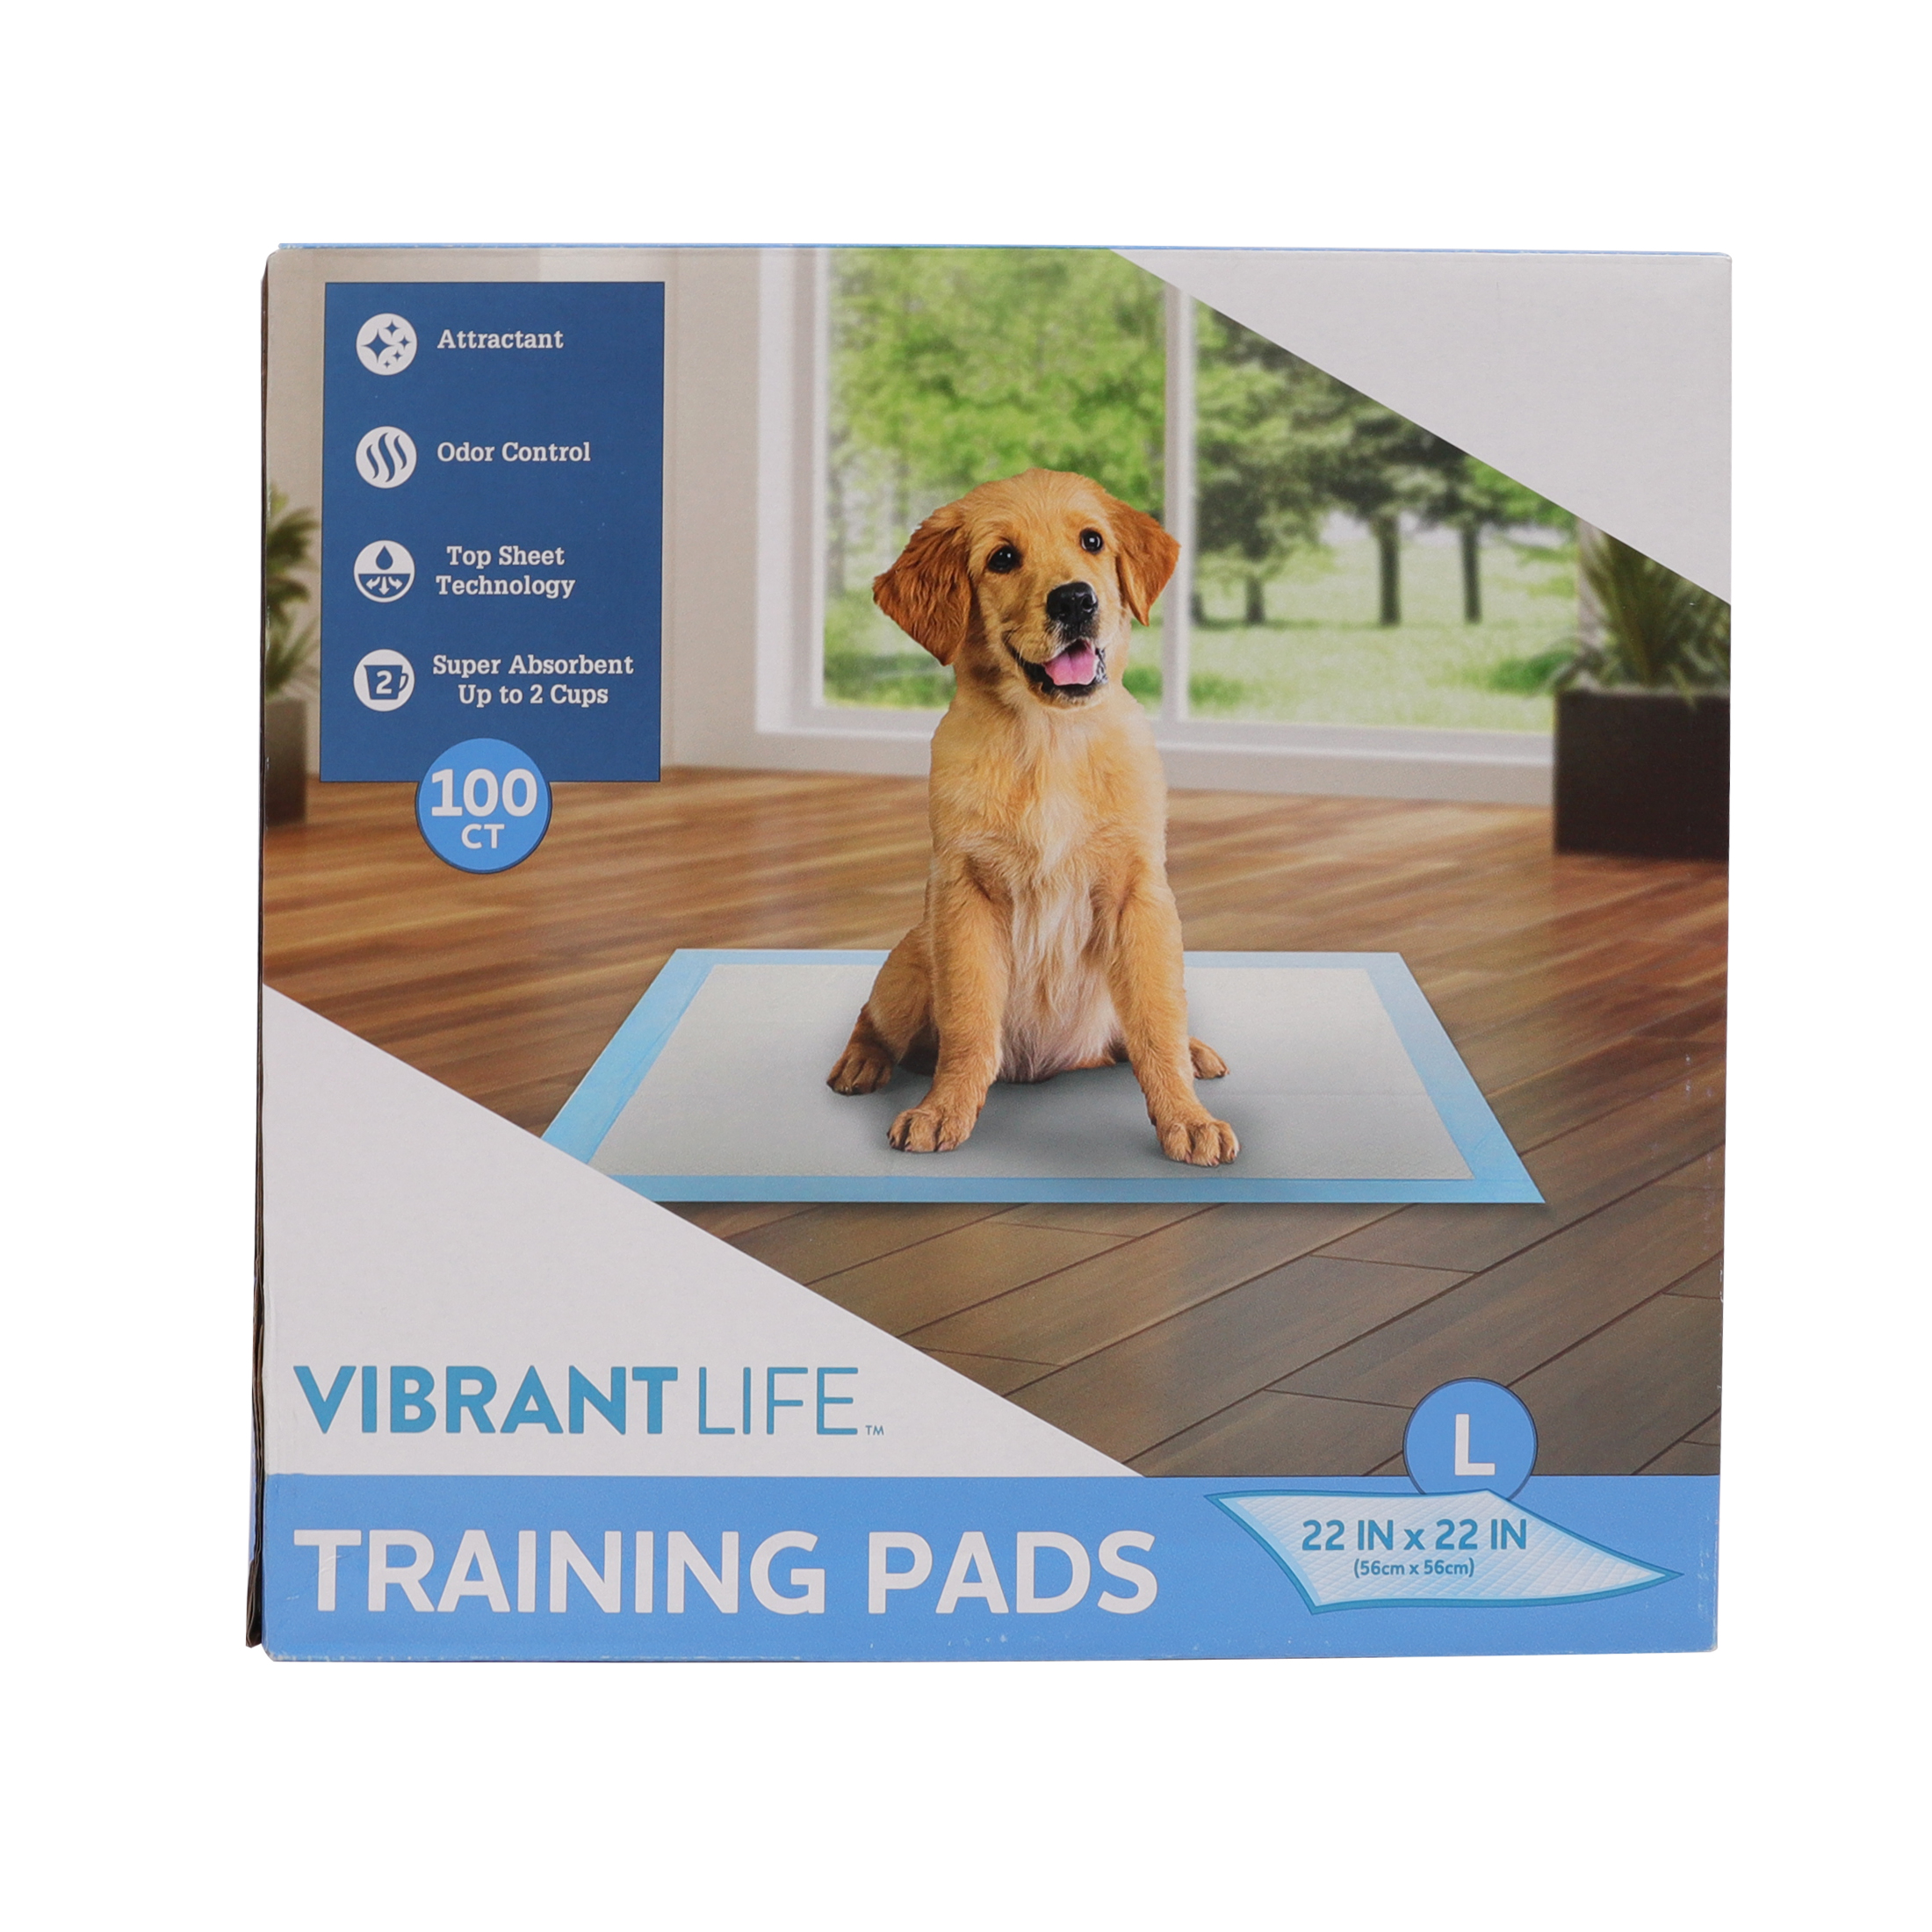 Vibrant Life Training Pads, Dog & Puppy Pads, L, 22 in x 22 in,100 Count - image 1 of 7